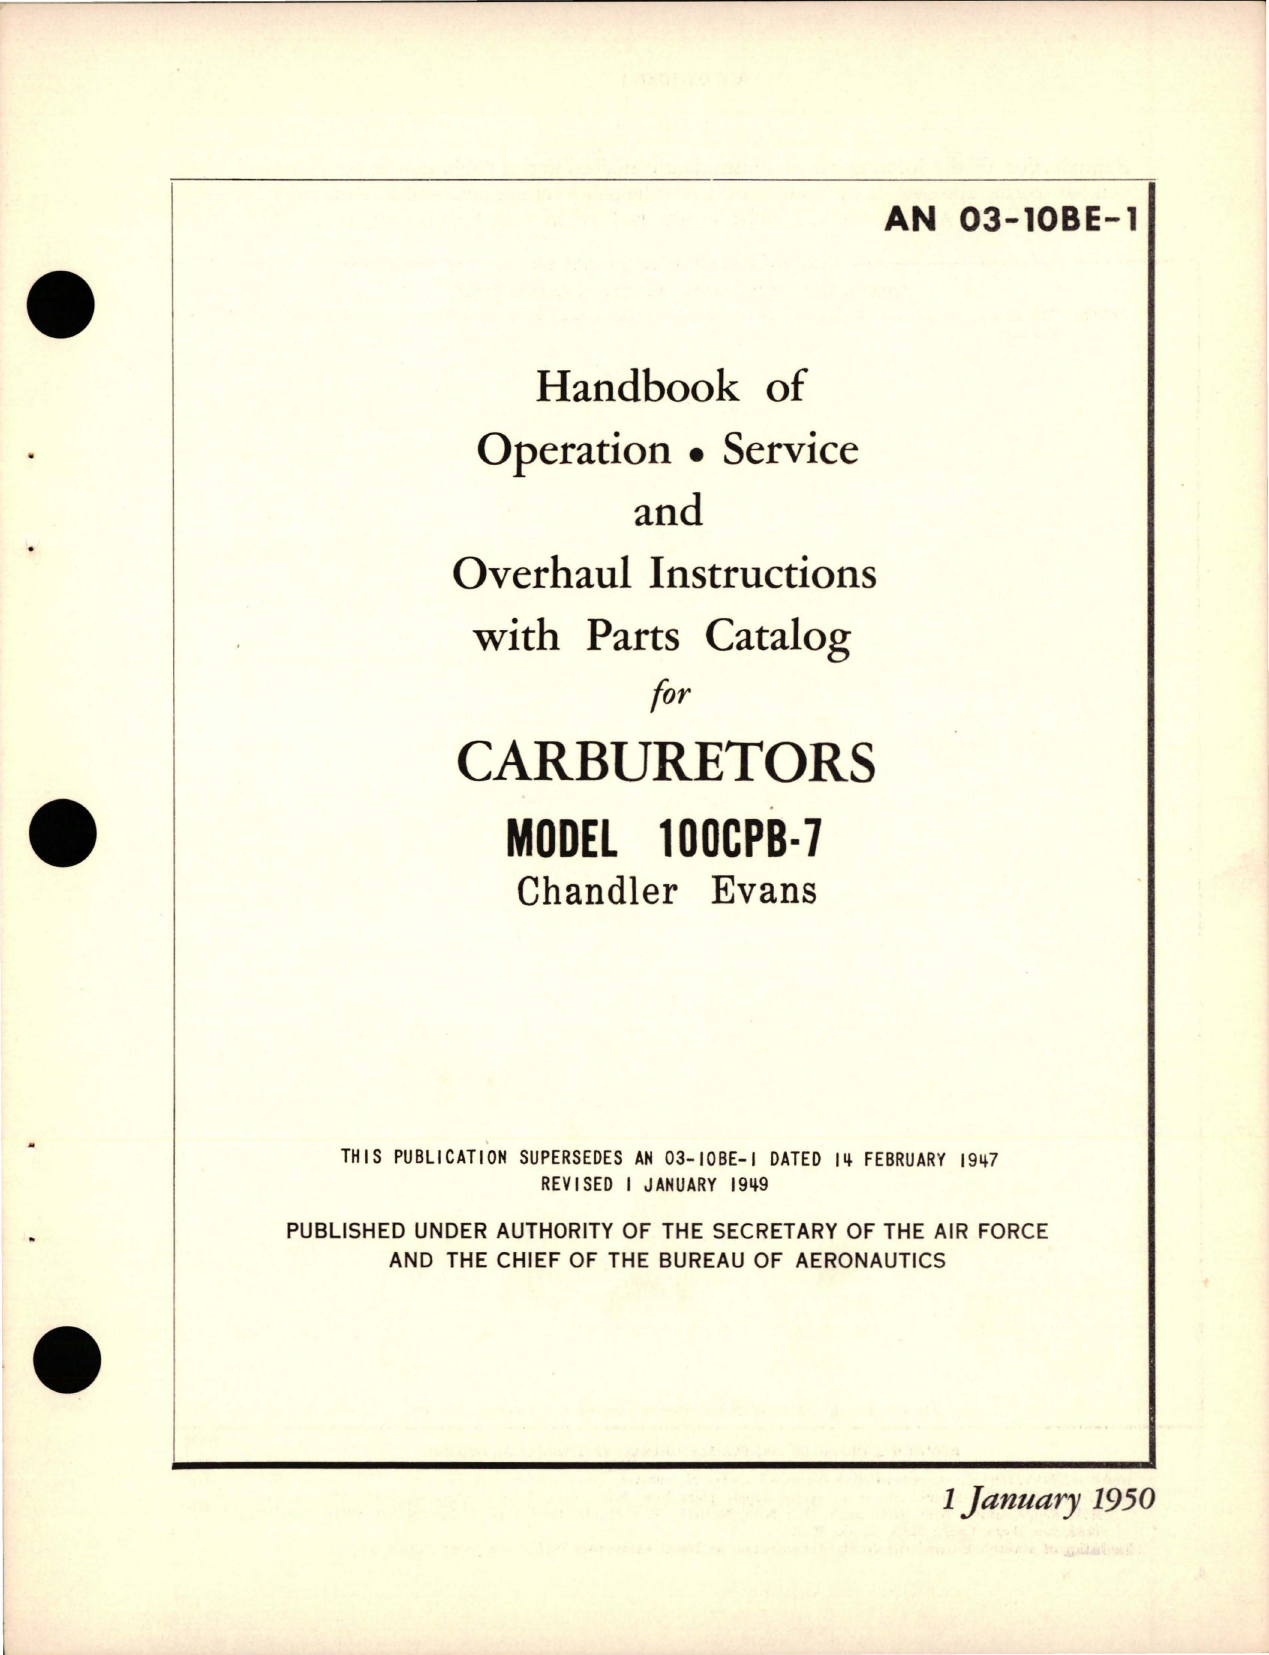 Sample page 1 from AirCorps Library document: Operation, Service, Overhaul Instructions with Parts Catalog for Carburetors - Model 100CPB-7 